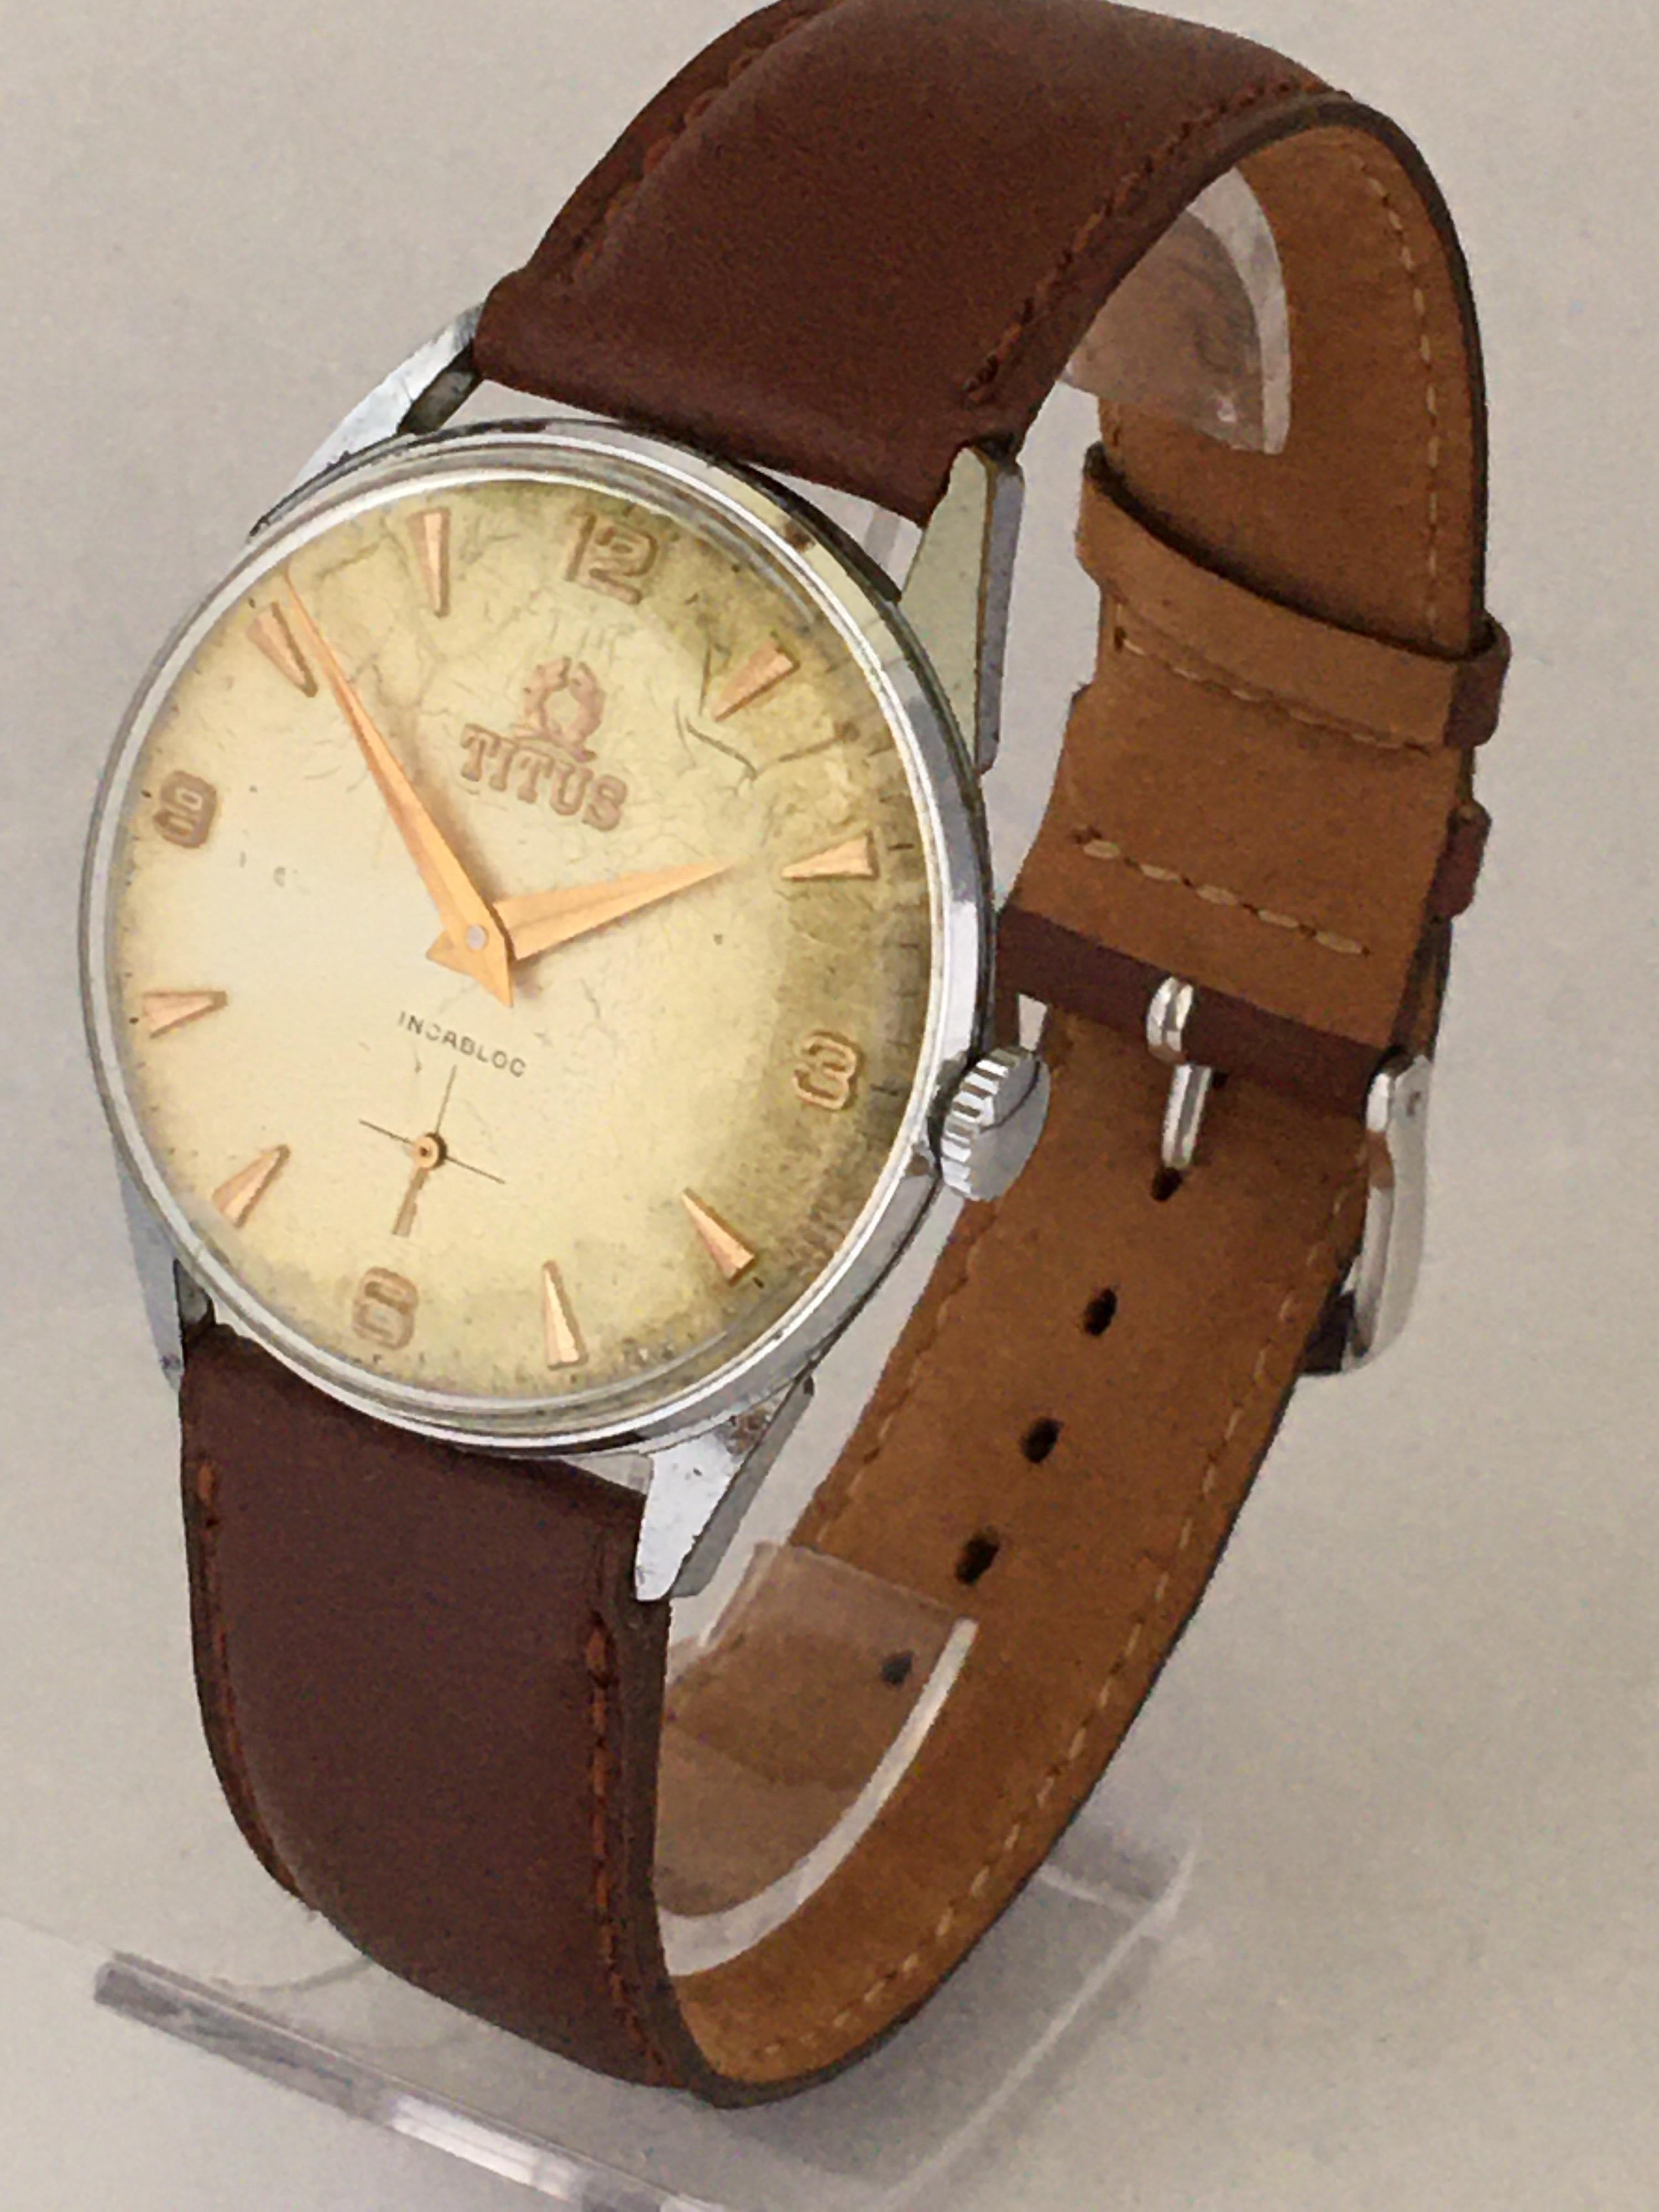 This beautiful pre-owned manual winding Geneve Watch is working and it is ticking and running well.
Visible signs of ageing and gentle used with tiny scratches on the back cover and the dial is worn as shown. It is fitted with new winder. 

Please